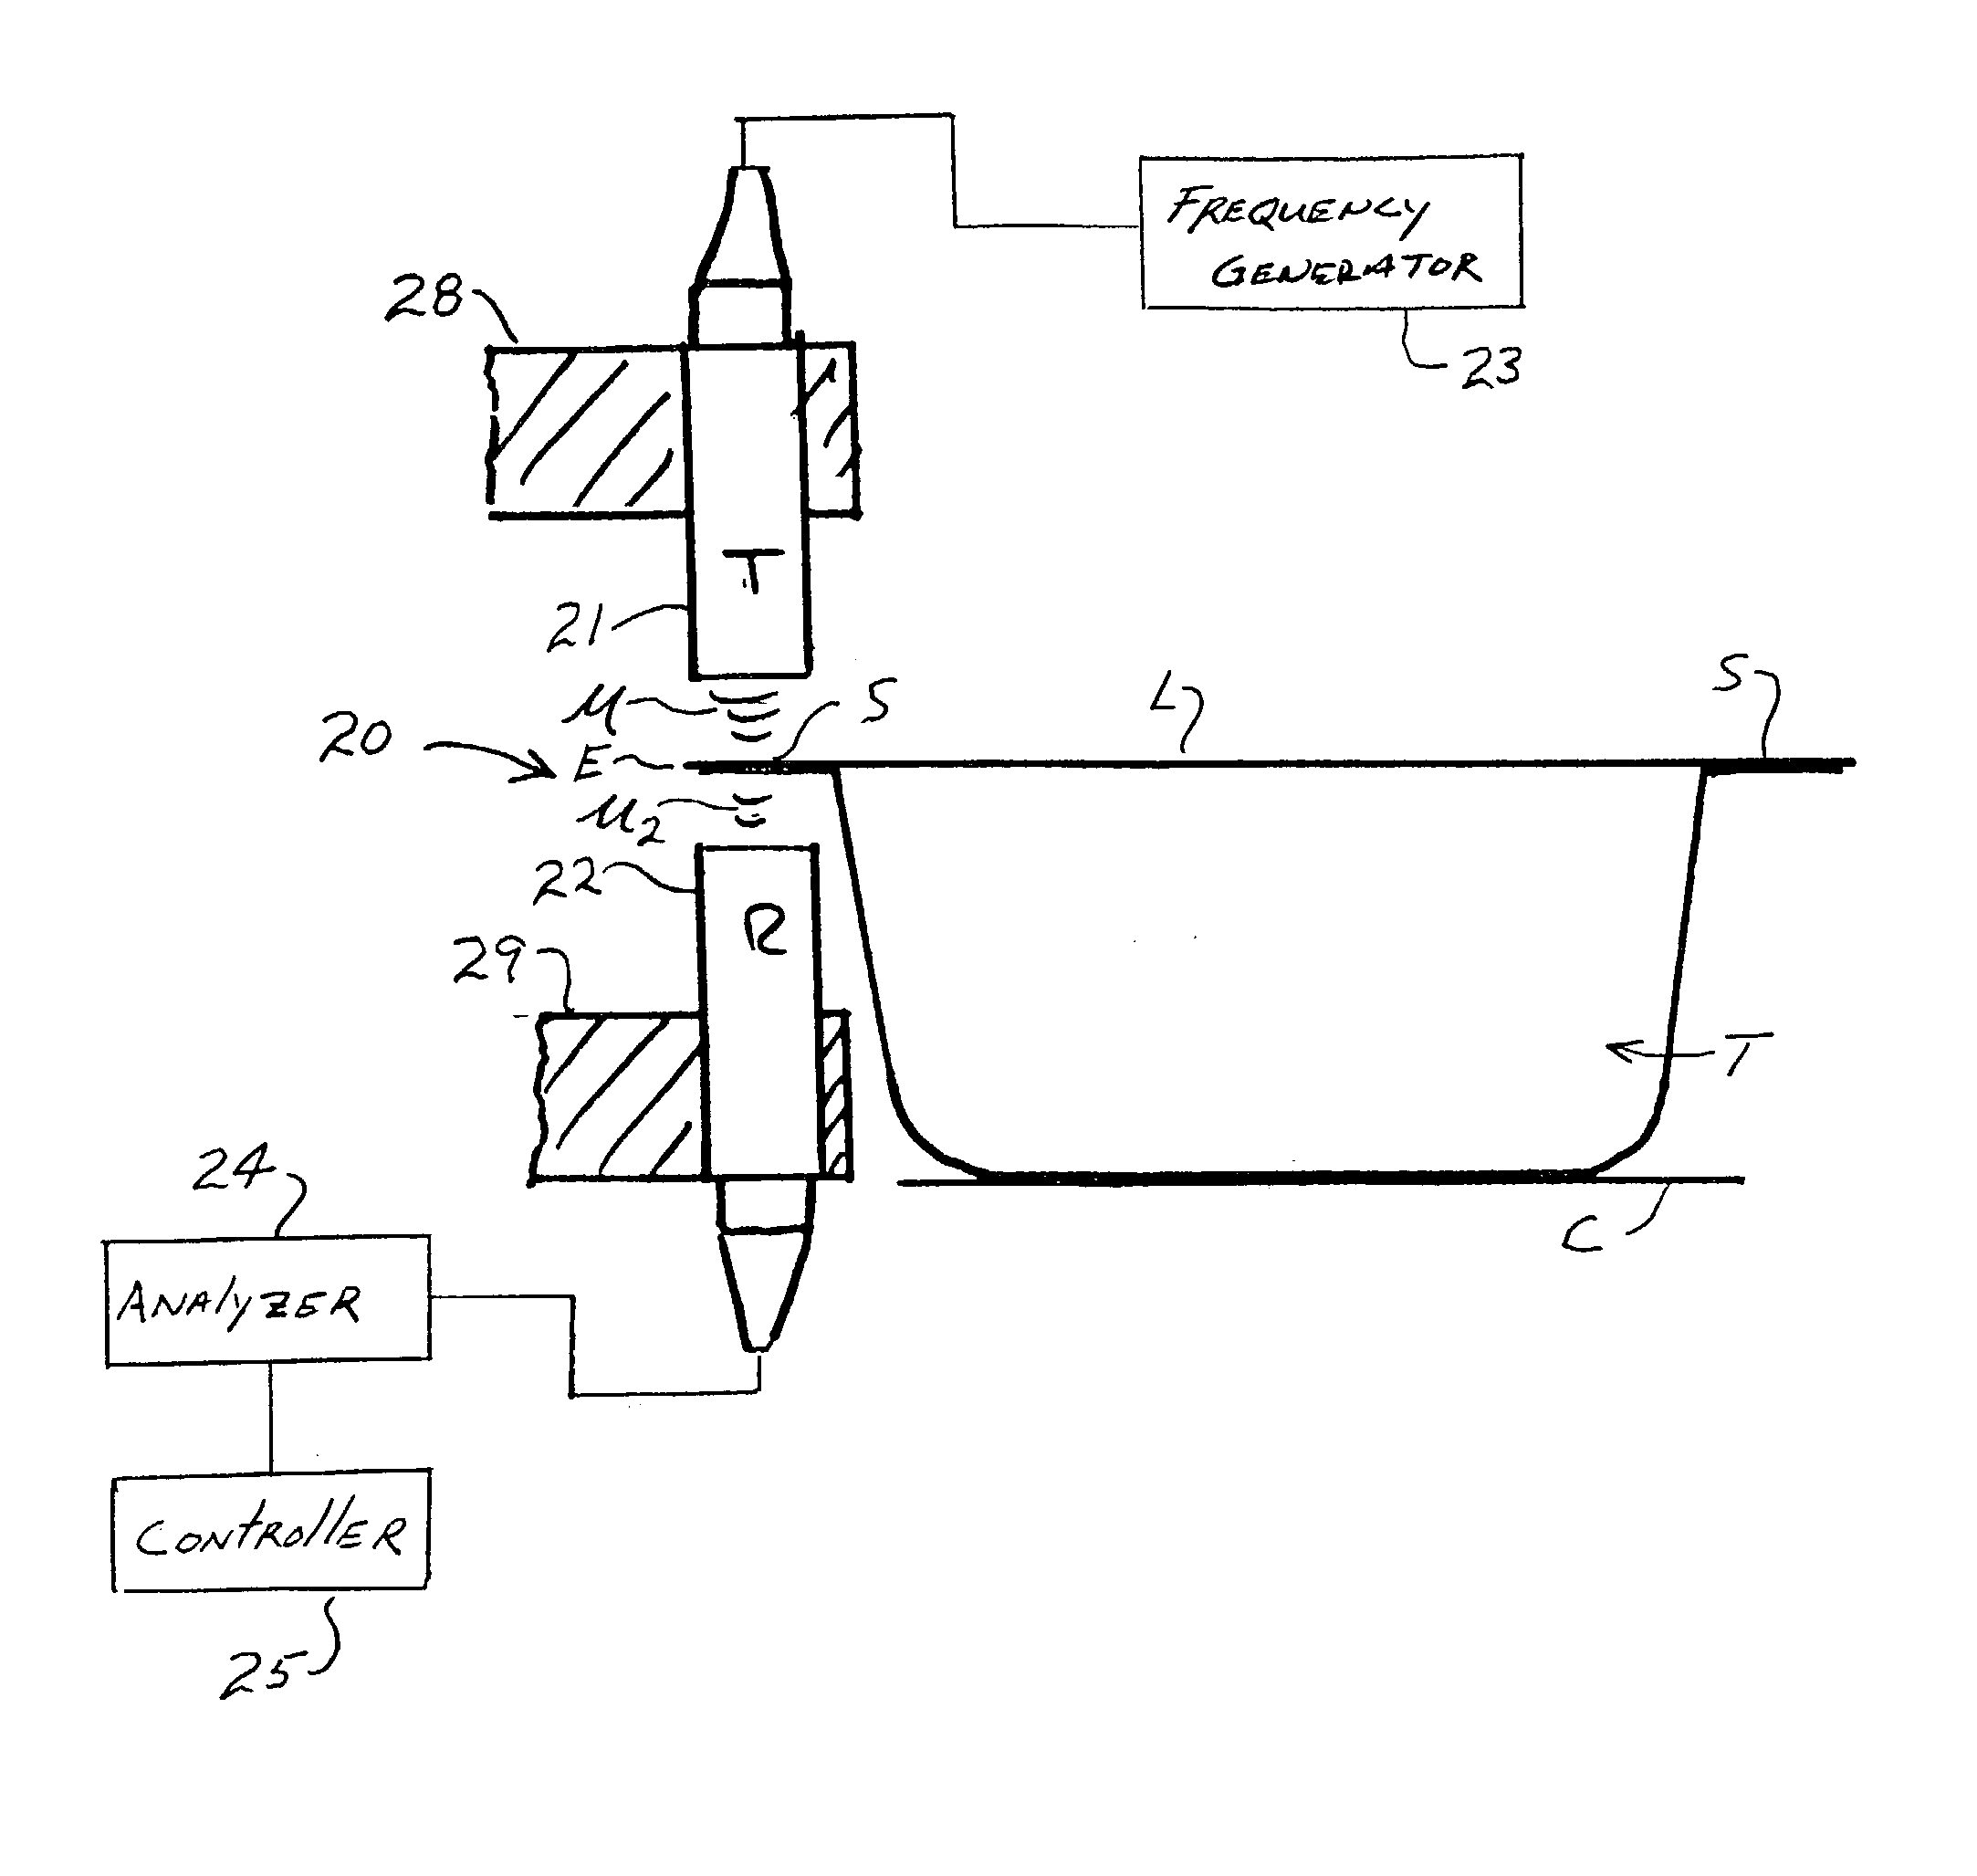 Method and apparatus for airborne ultrasonic testing of package and container seals